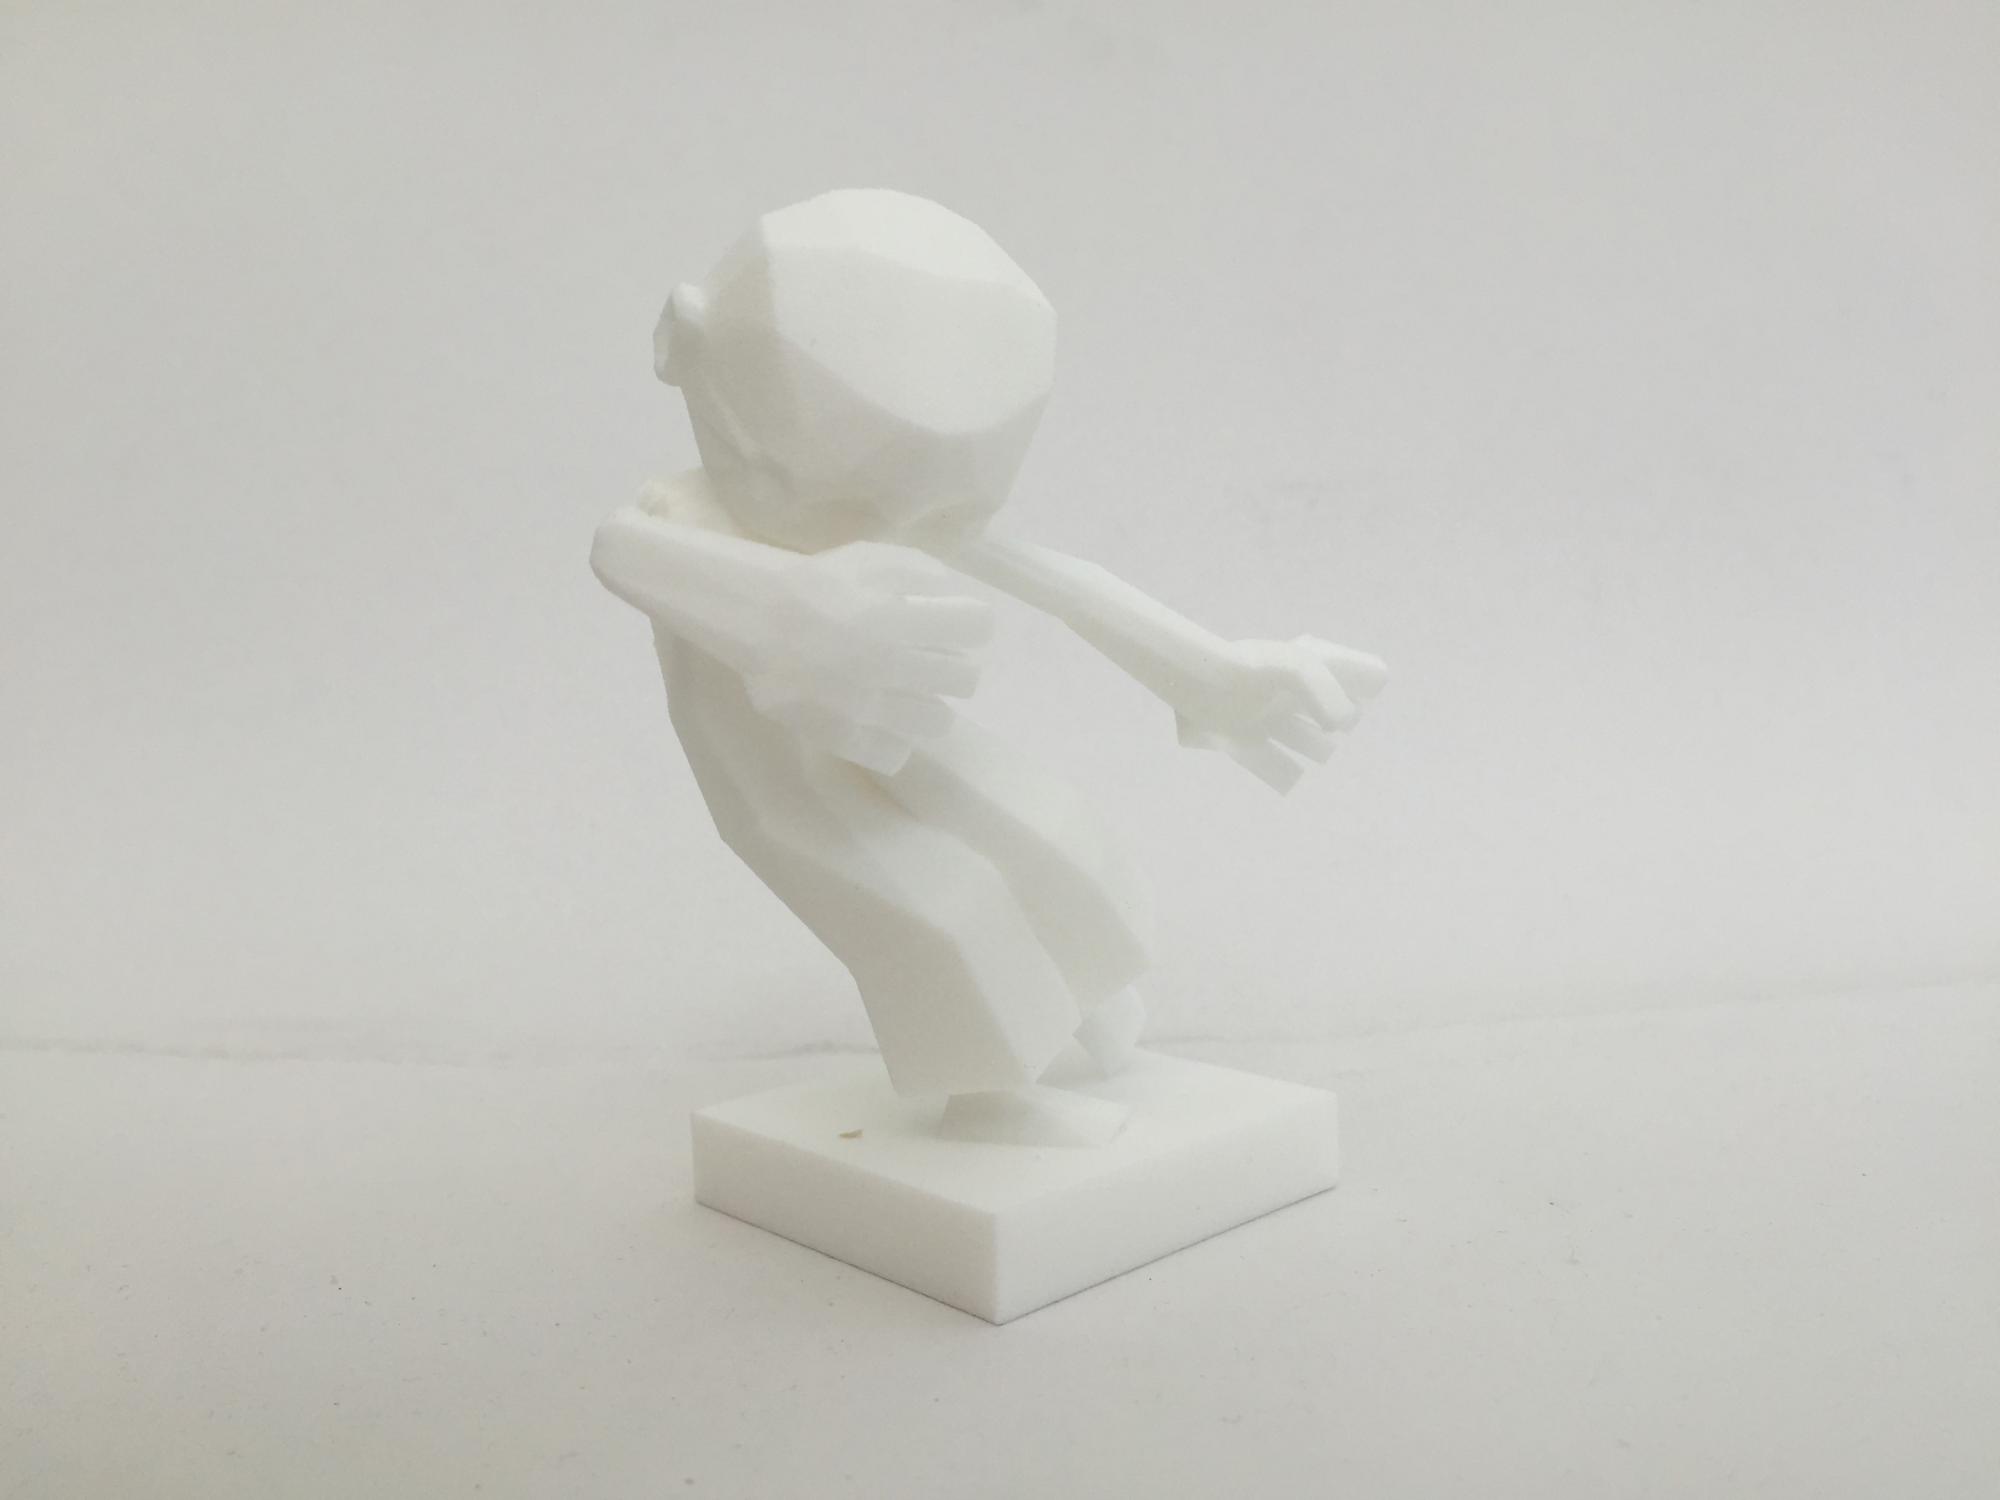 One ‘frame’ of the 3D animation 3D printed